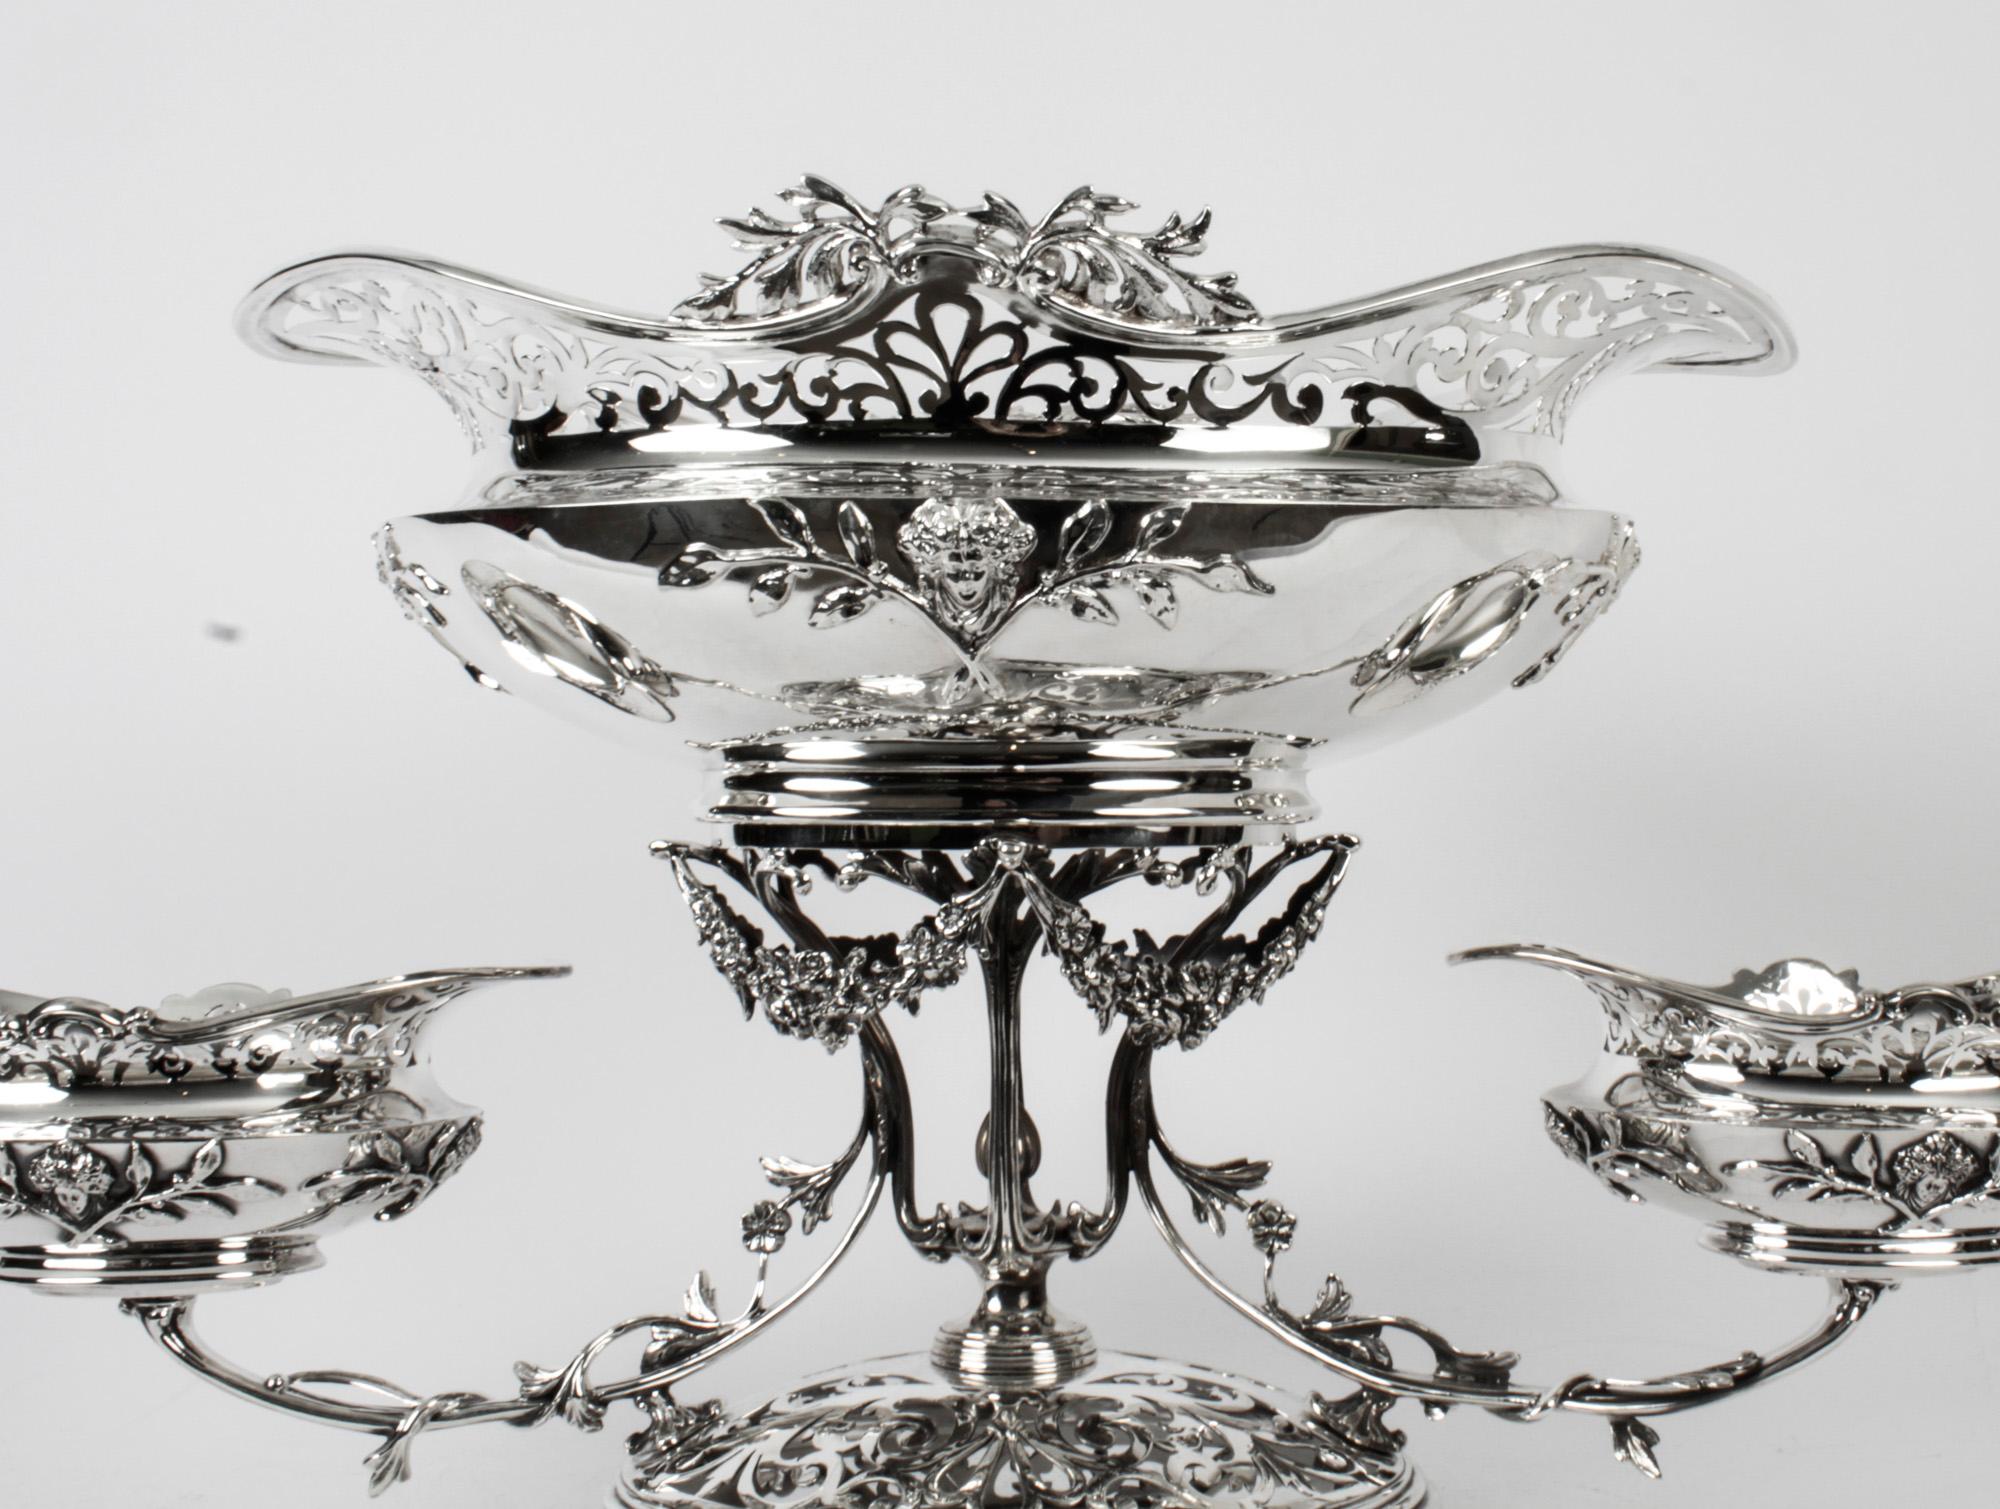 Antique Victorian Silverplate Centrepiece Mappin & Webb 1880 19th Century For Sale 1